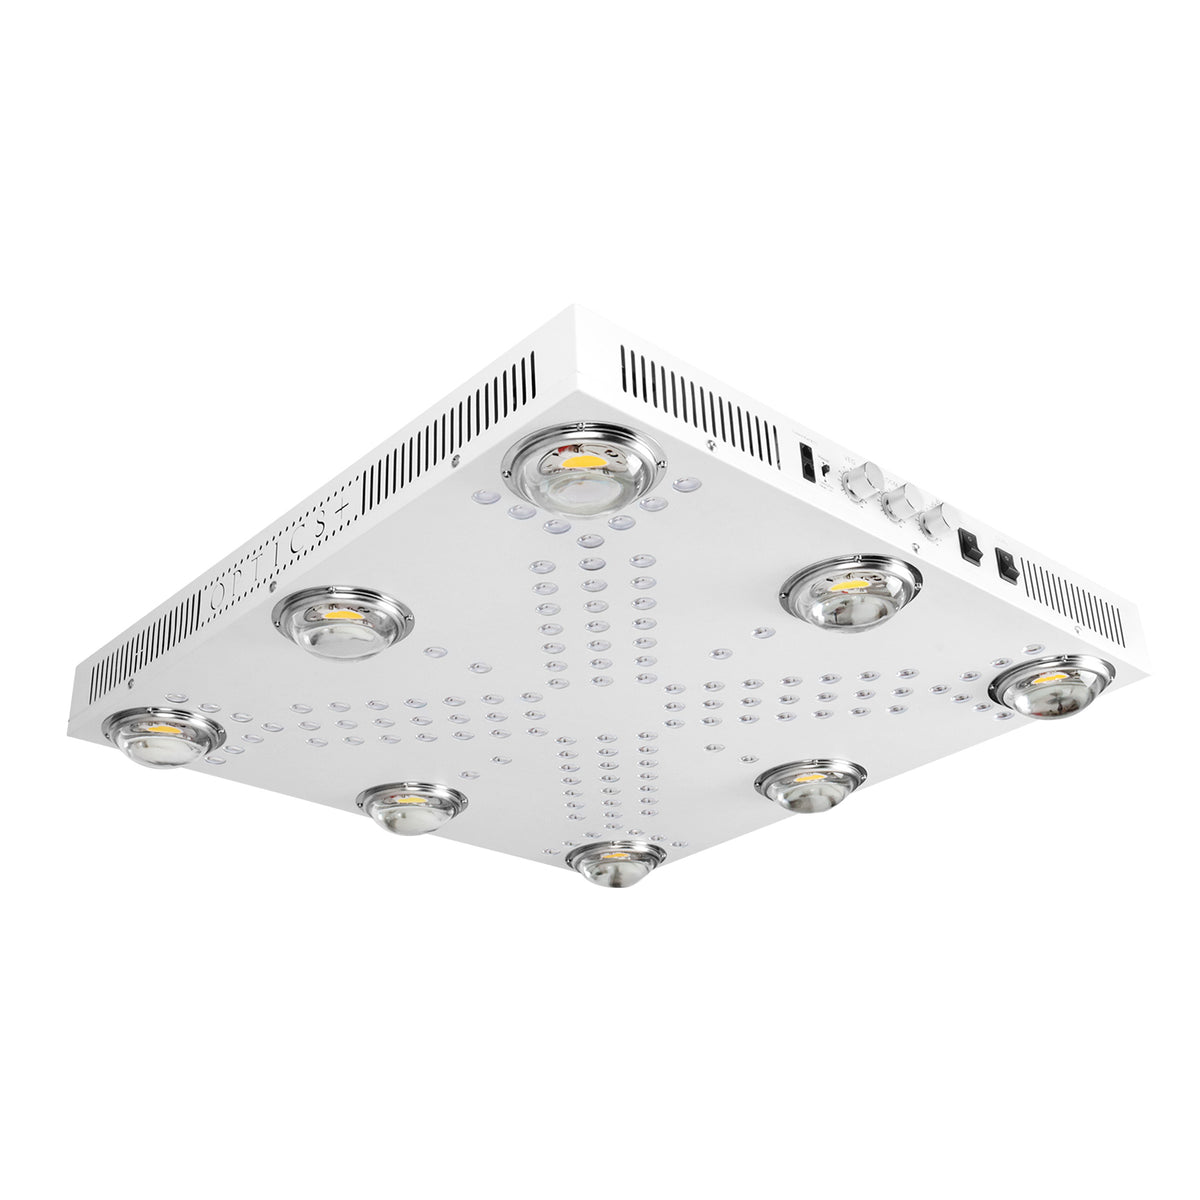 Optimal Hanging Height and Coverage Area for COB LED Grow Light